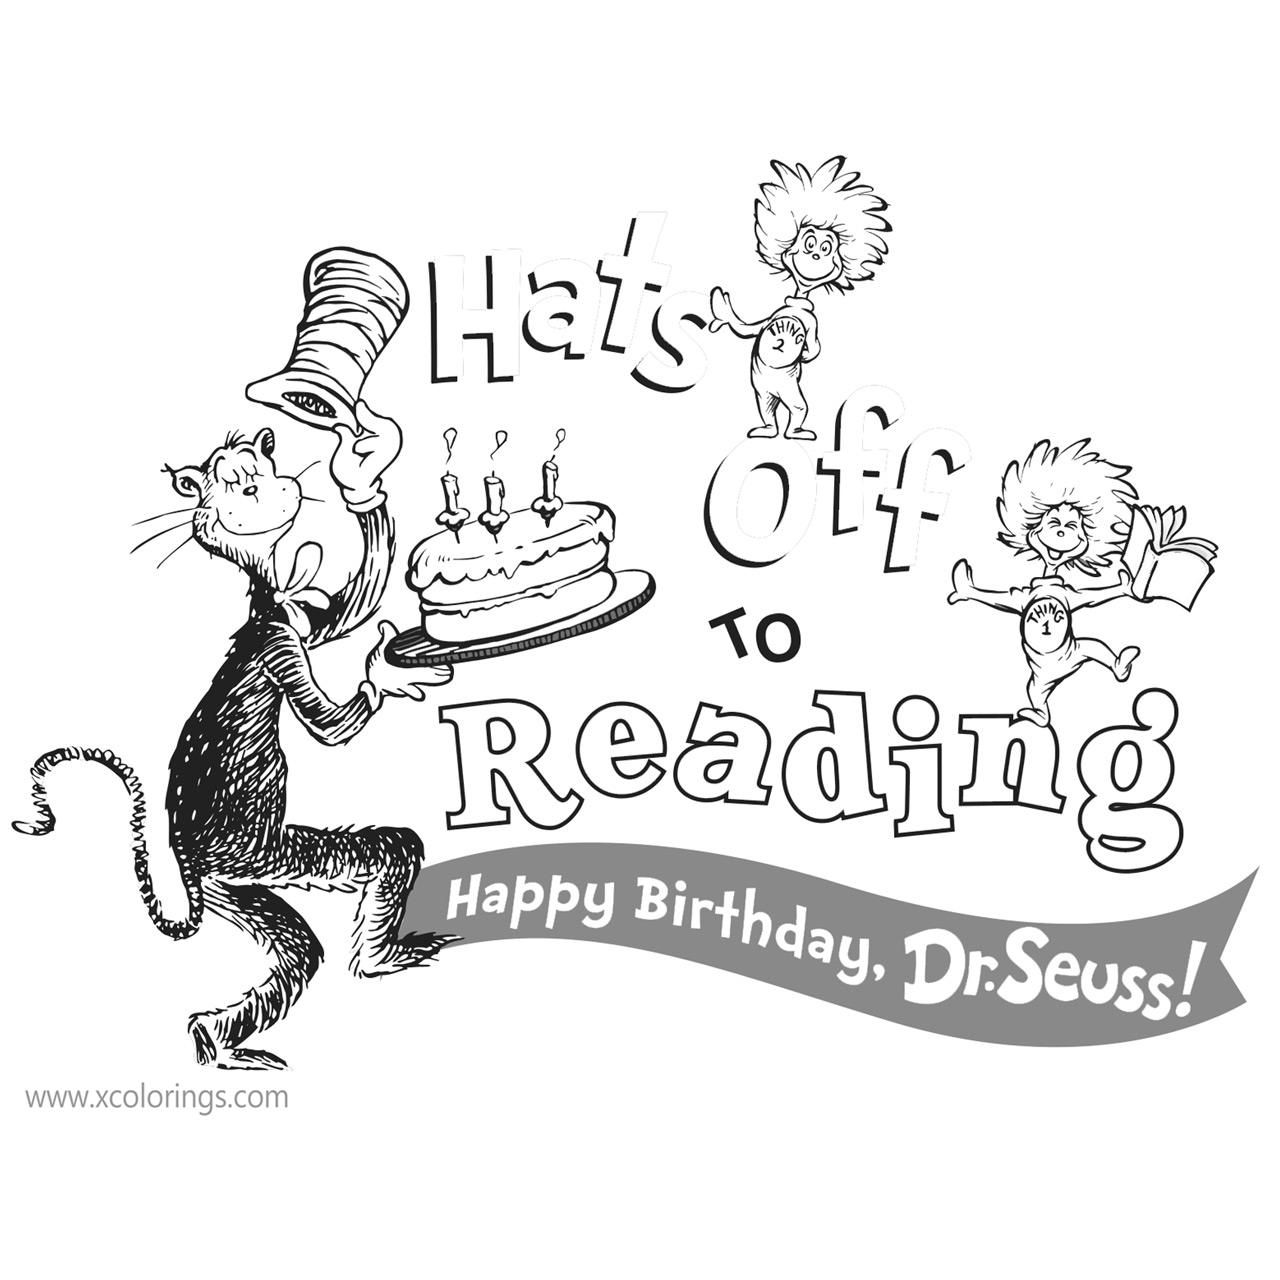 Happy Birthday Dr Seuss Coloring Pages Cat In The Hat and Thing One Ting Two - XColorings.com